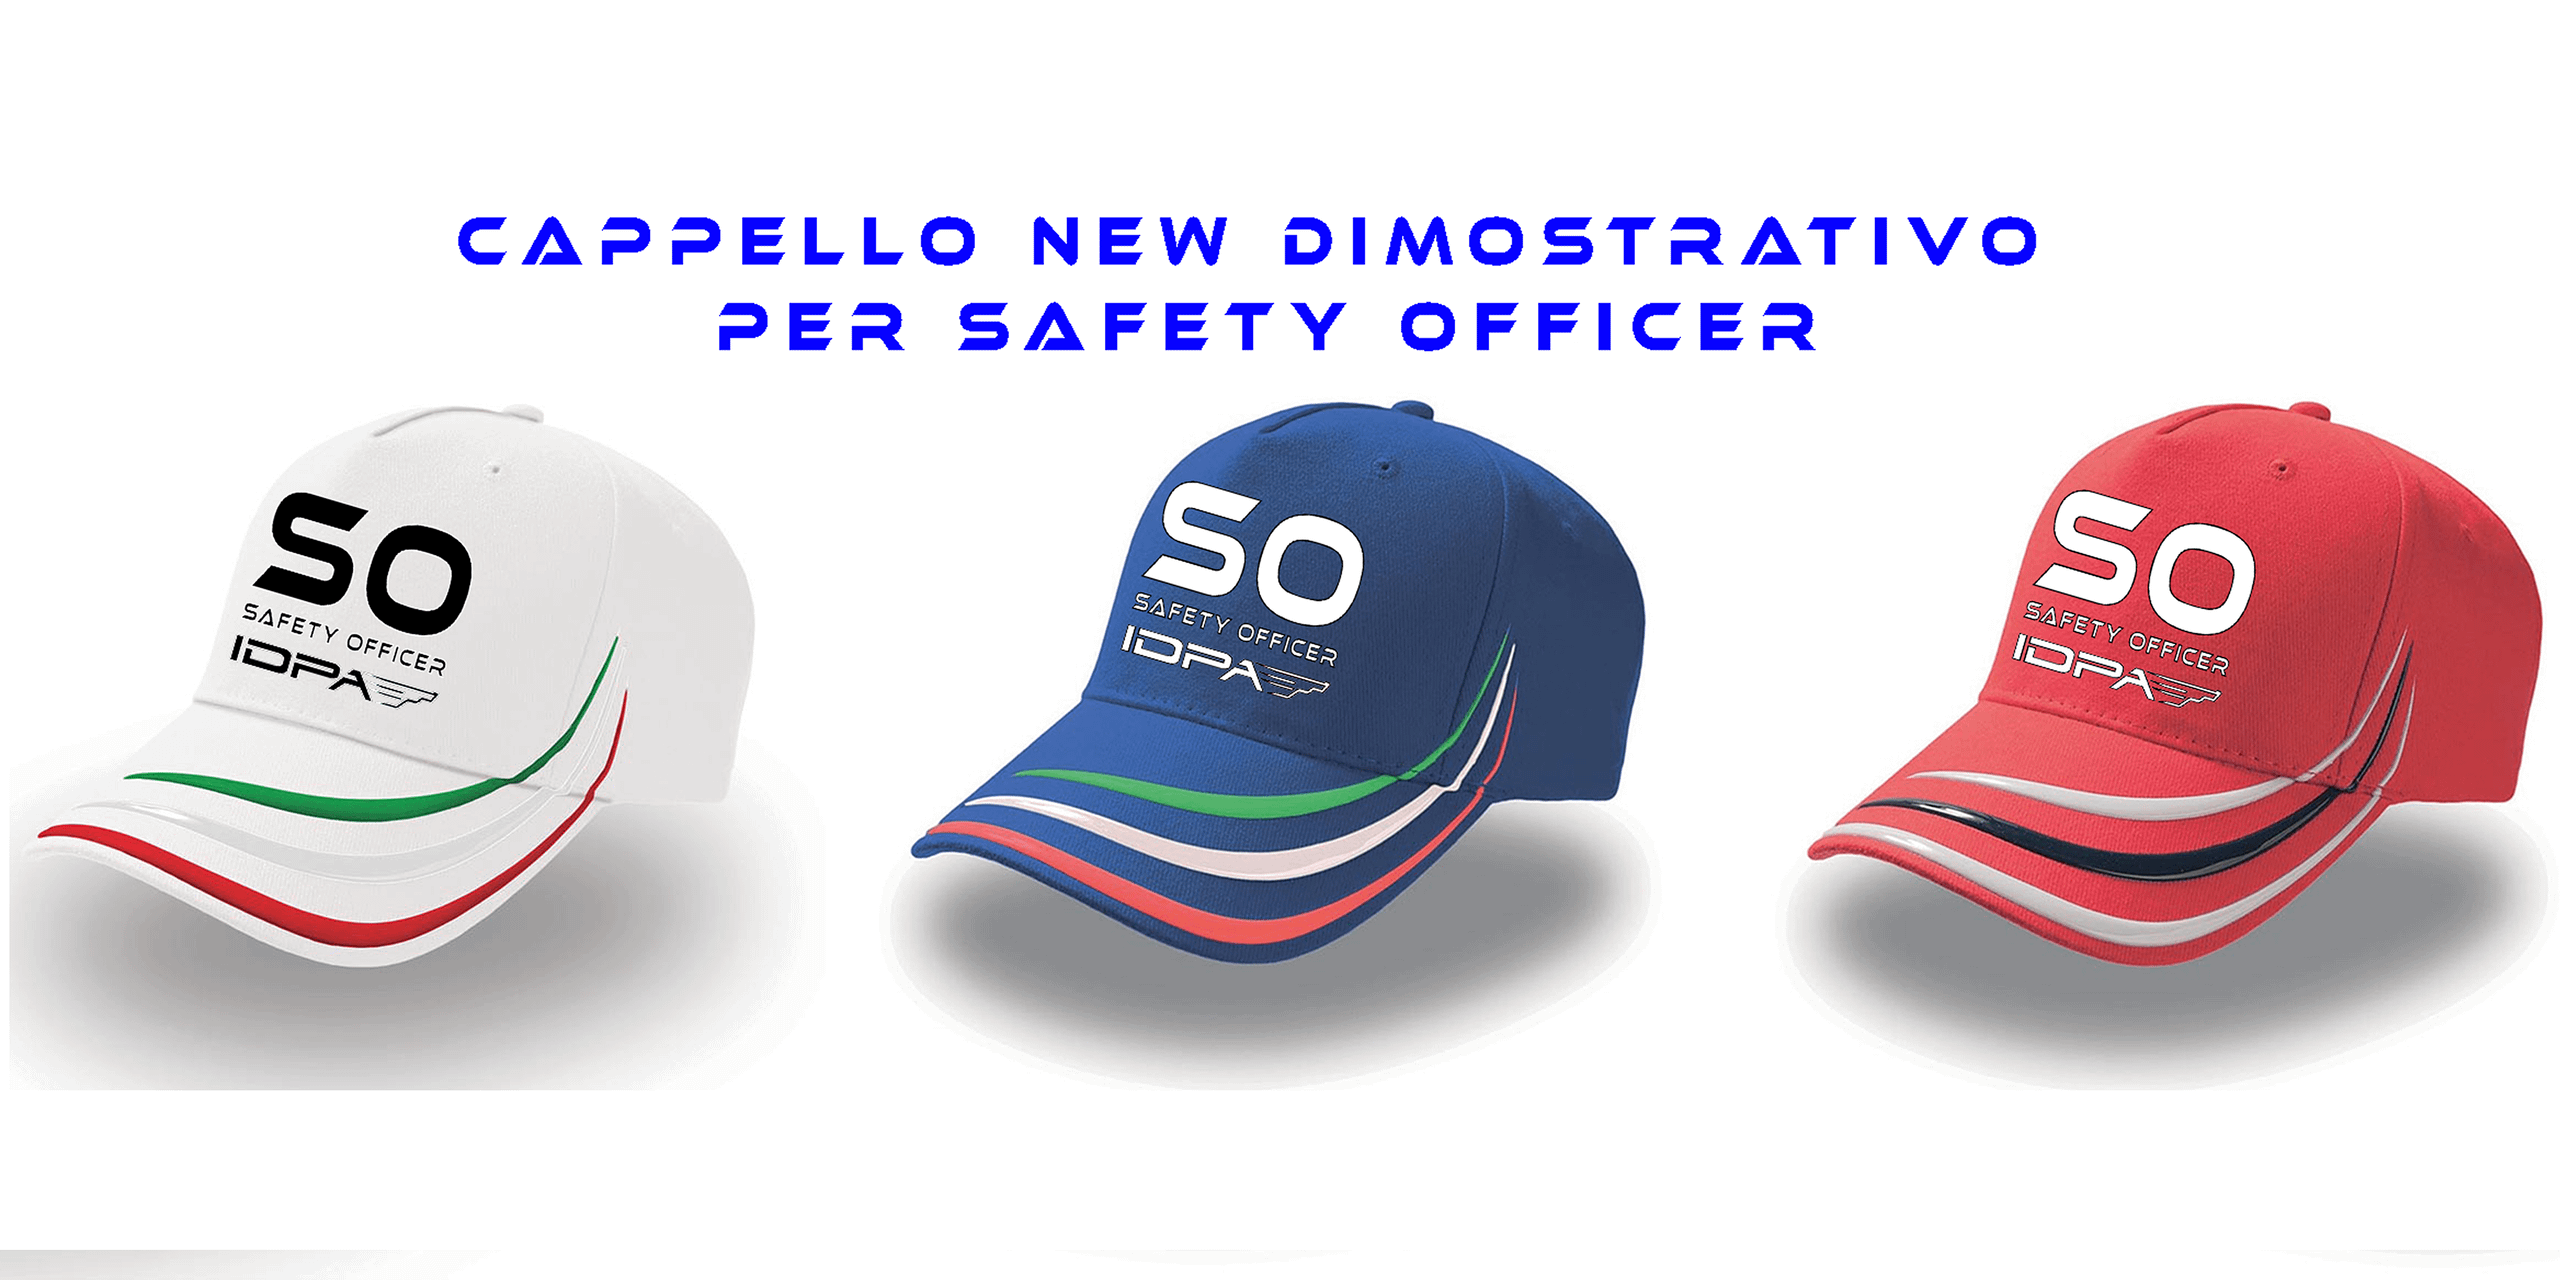 Cappellino Safety Officer New